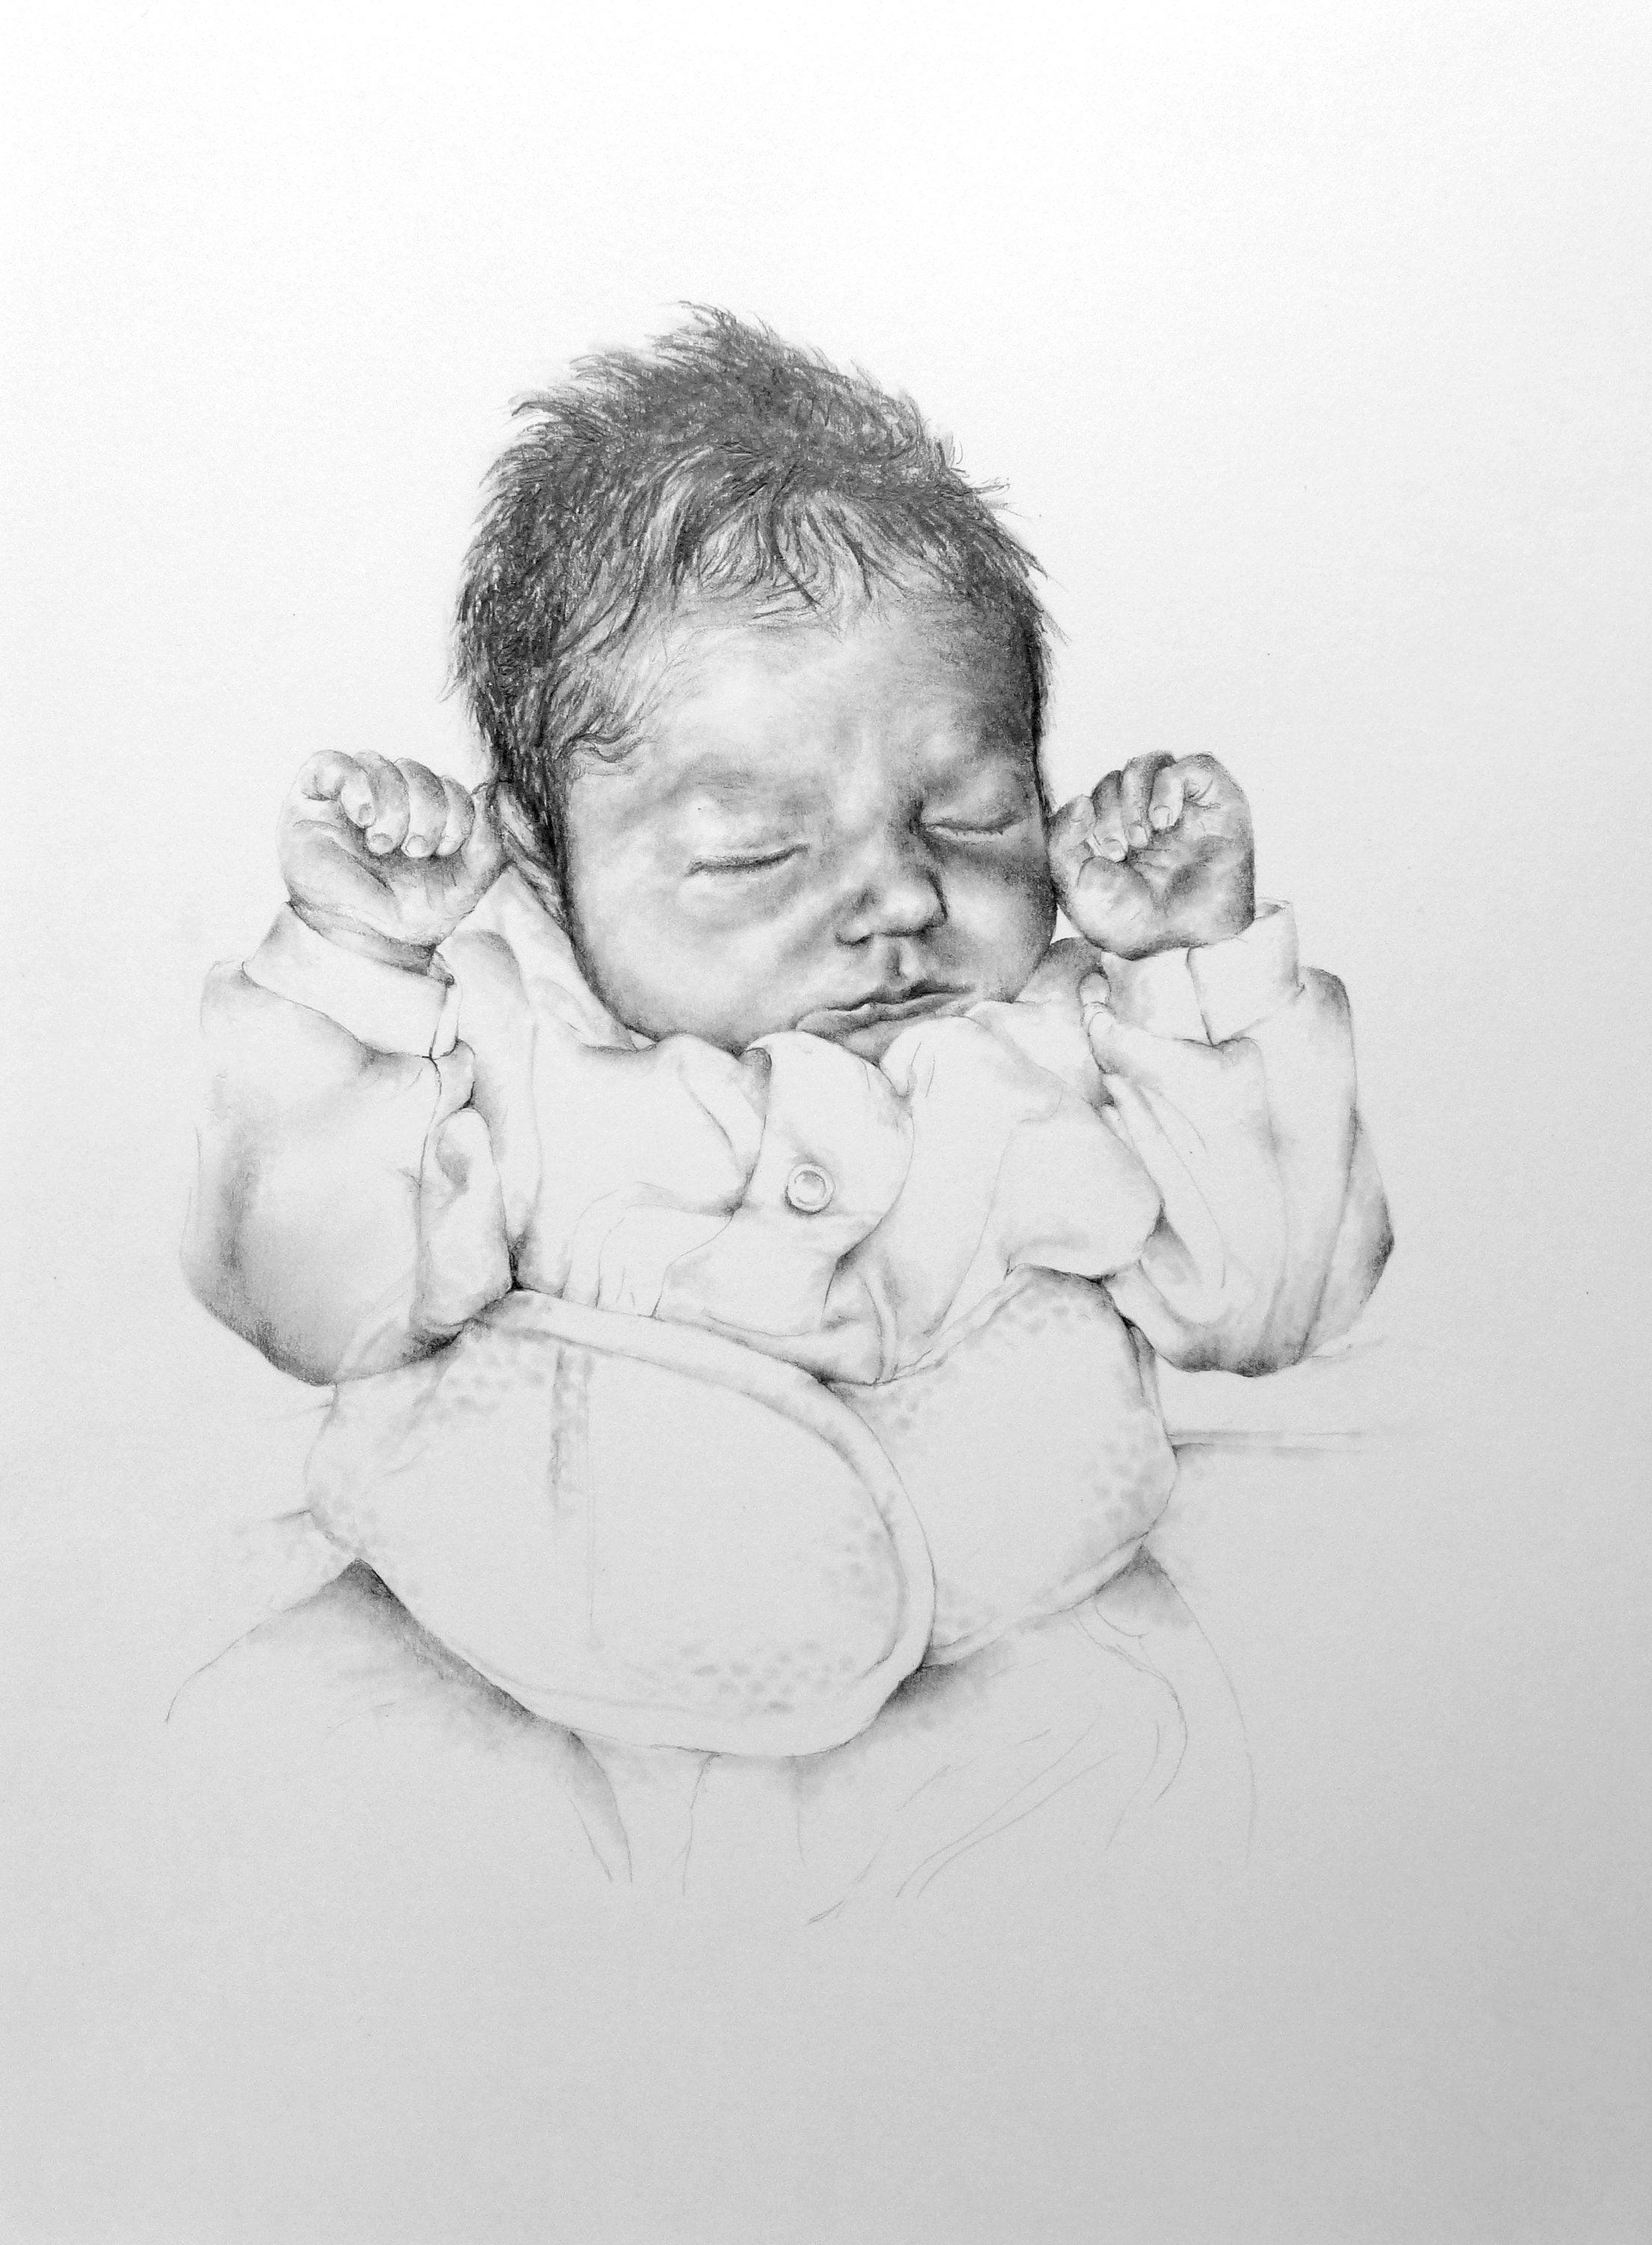 How to Draw a Baby - Learn How to Draw an Adorable Baby